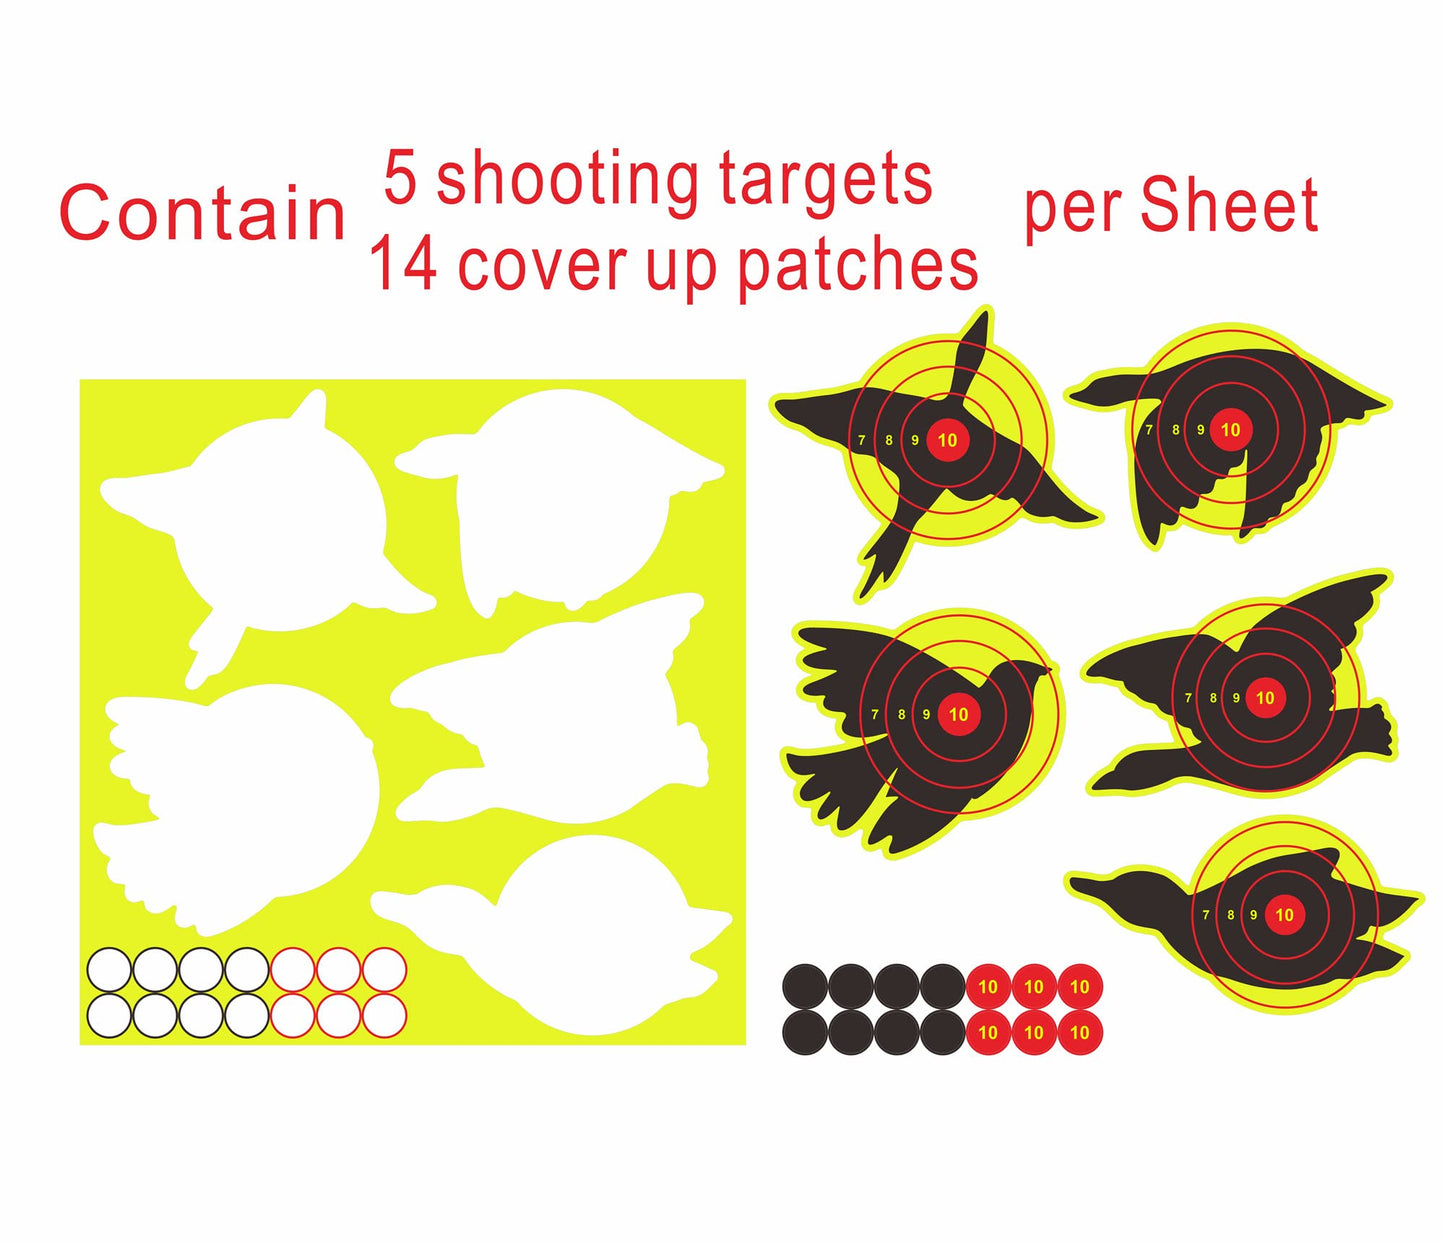 Hybsk 12 Inch Reactive Splatter Shooting Targets with Birds and Pasters for BB Gun Air Rifle Pellet Gun Rifle Pistol Bright Fluorescent Yellow Upon Impact Self Adhesive Targets